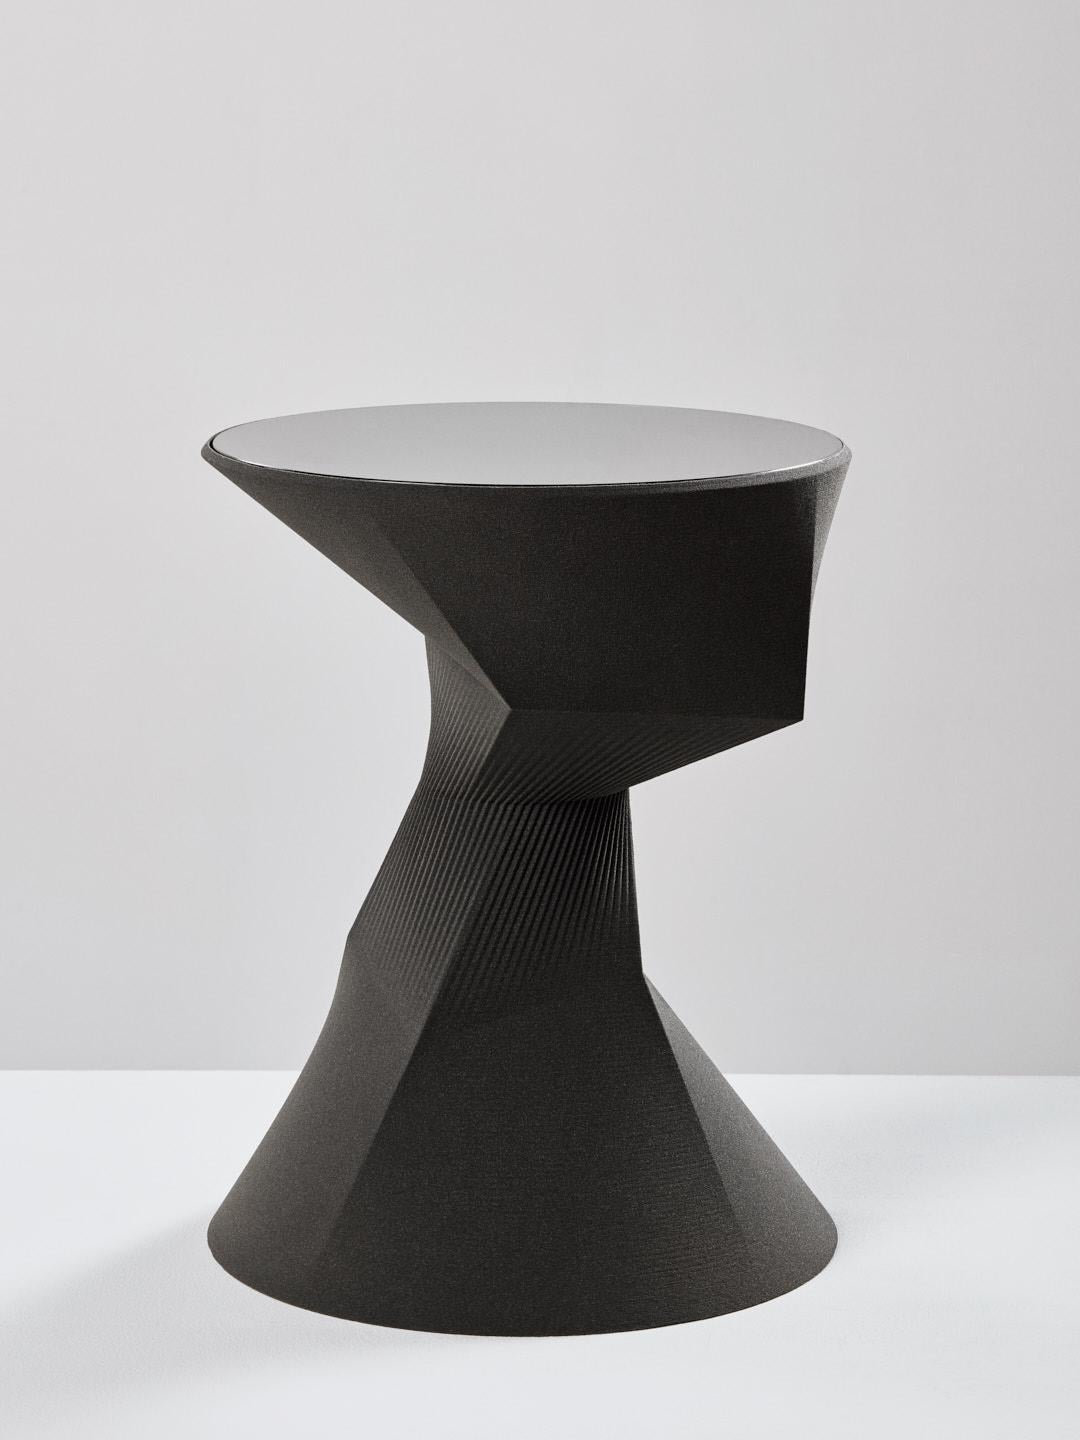 This high side table is part of the 3D sand printed objects from the Collection Sand in Motion from Rive Roshan. This high table is made of Quartz sand. The Sand in Motion Collection is composed of sculptural objects like tables, a chair, a floor